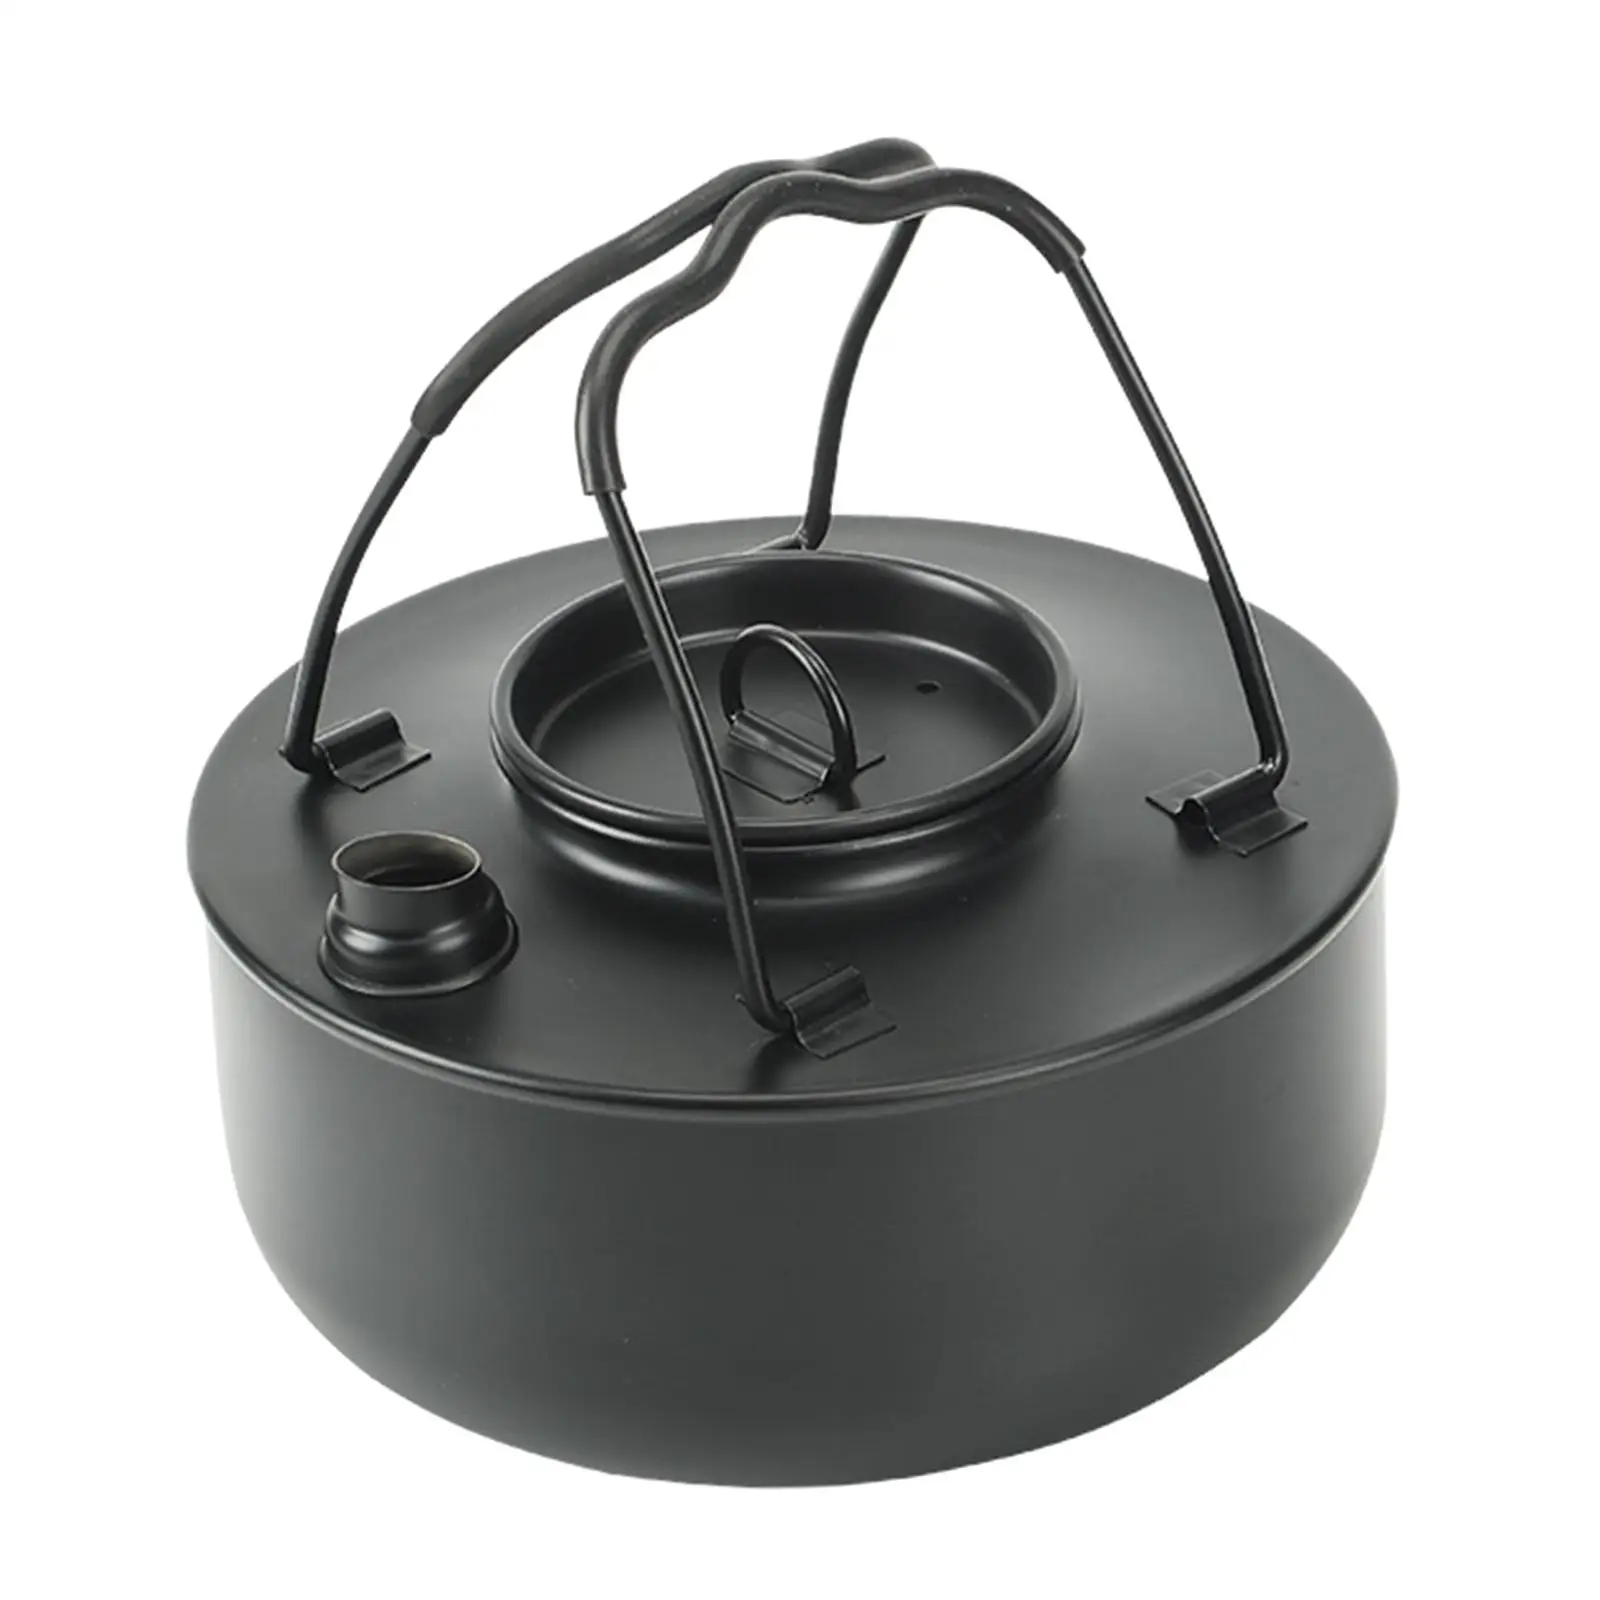 Outdoor Stove Pot Teapot Kitchenware 1.5L Camping Kettle for Cooking Kitchen